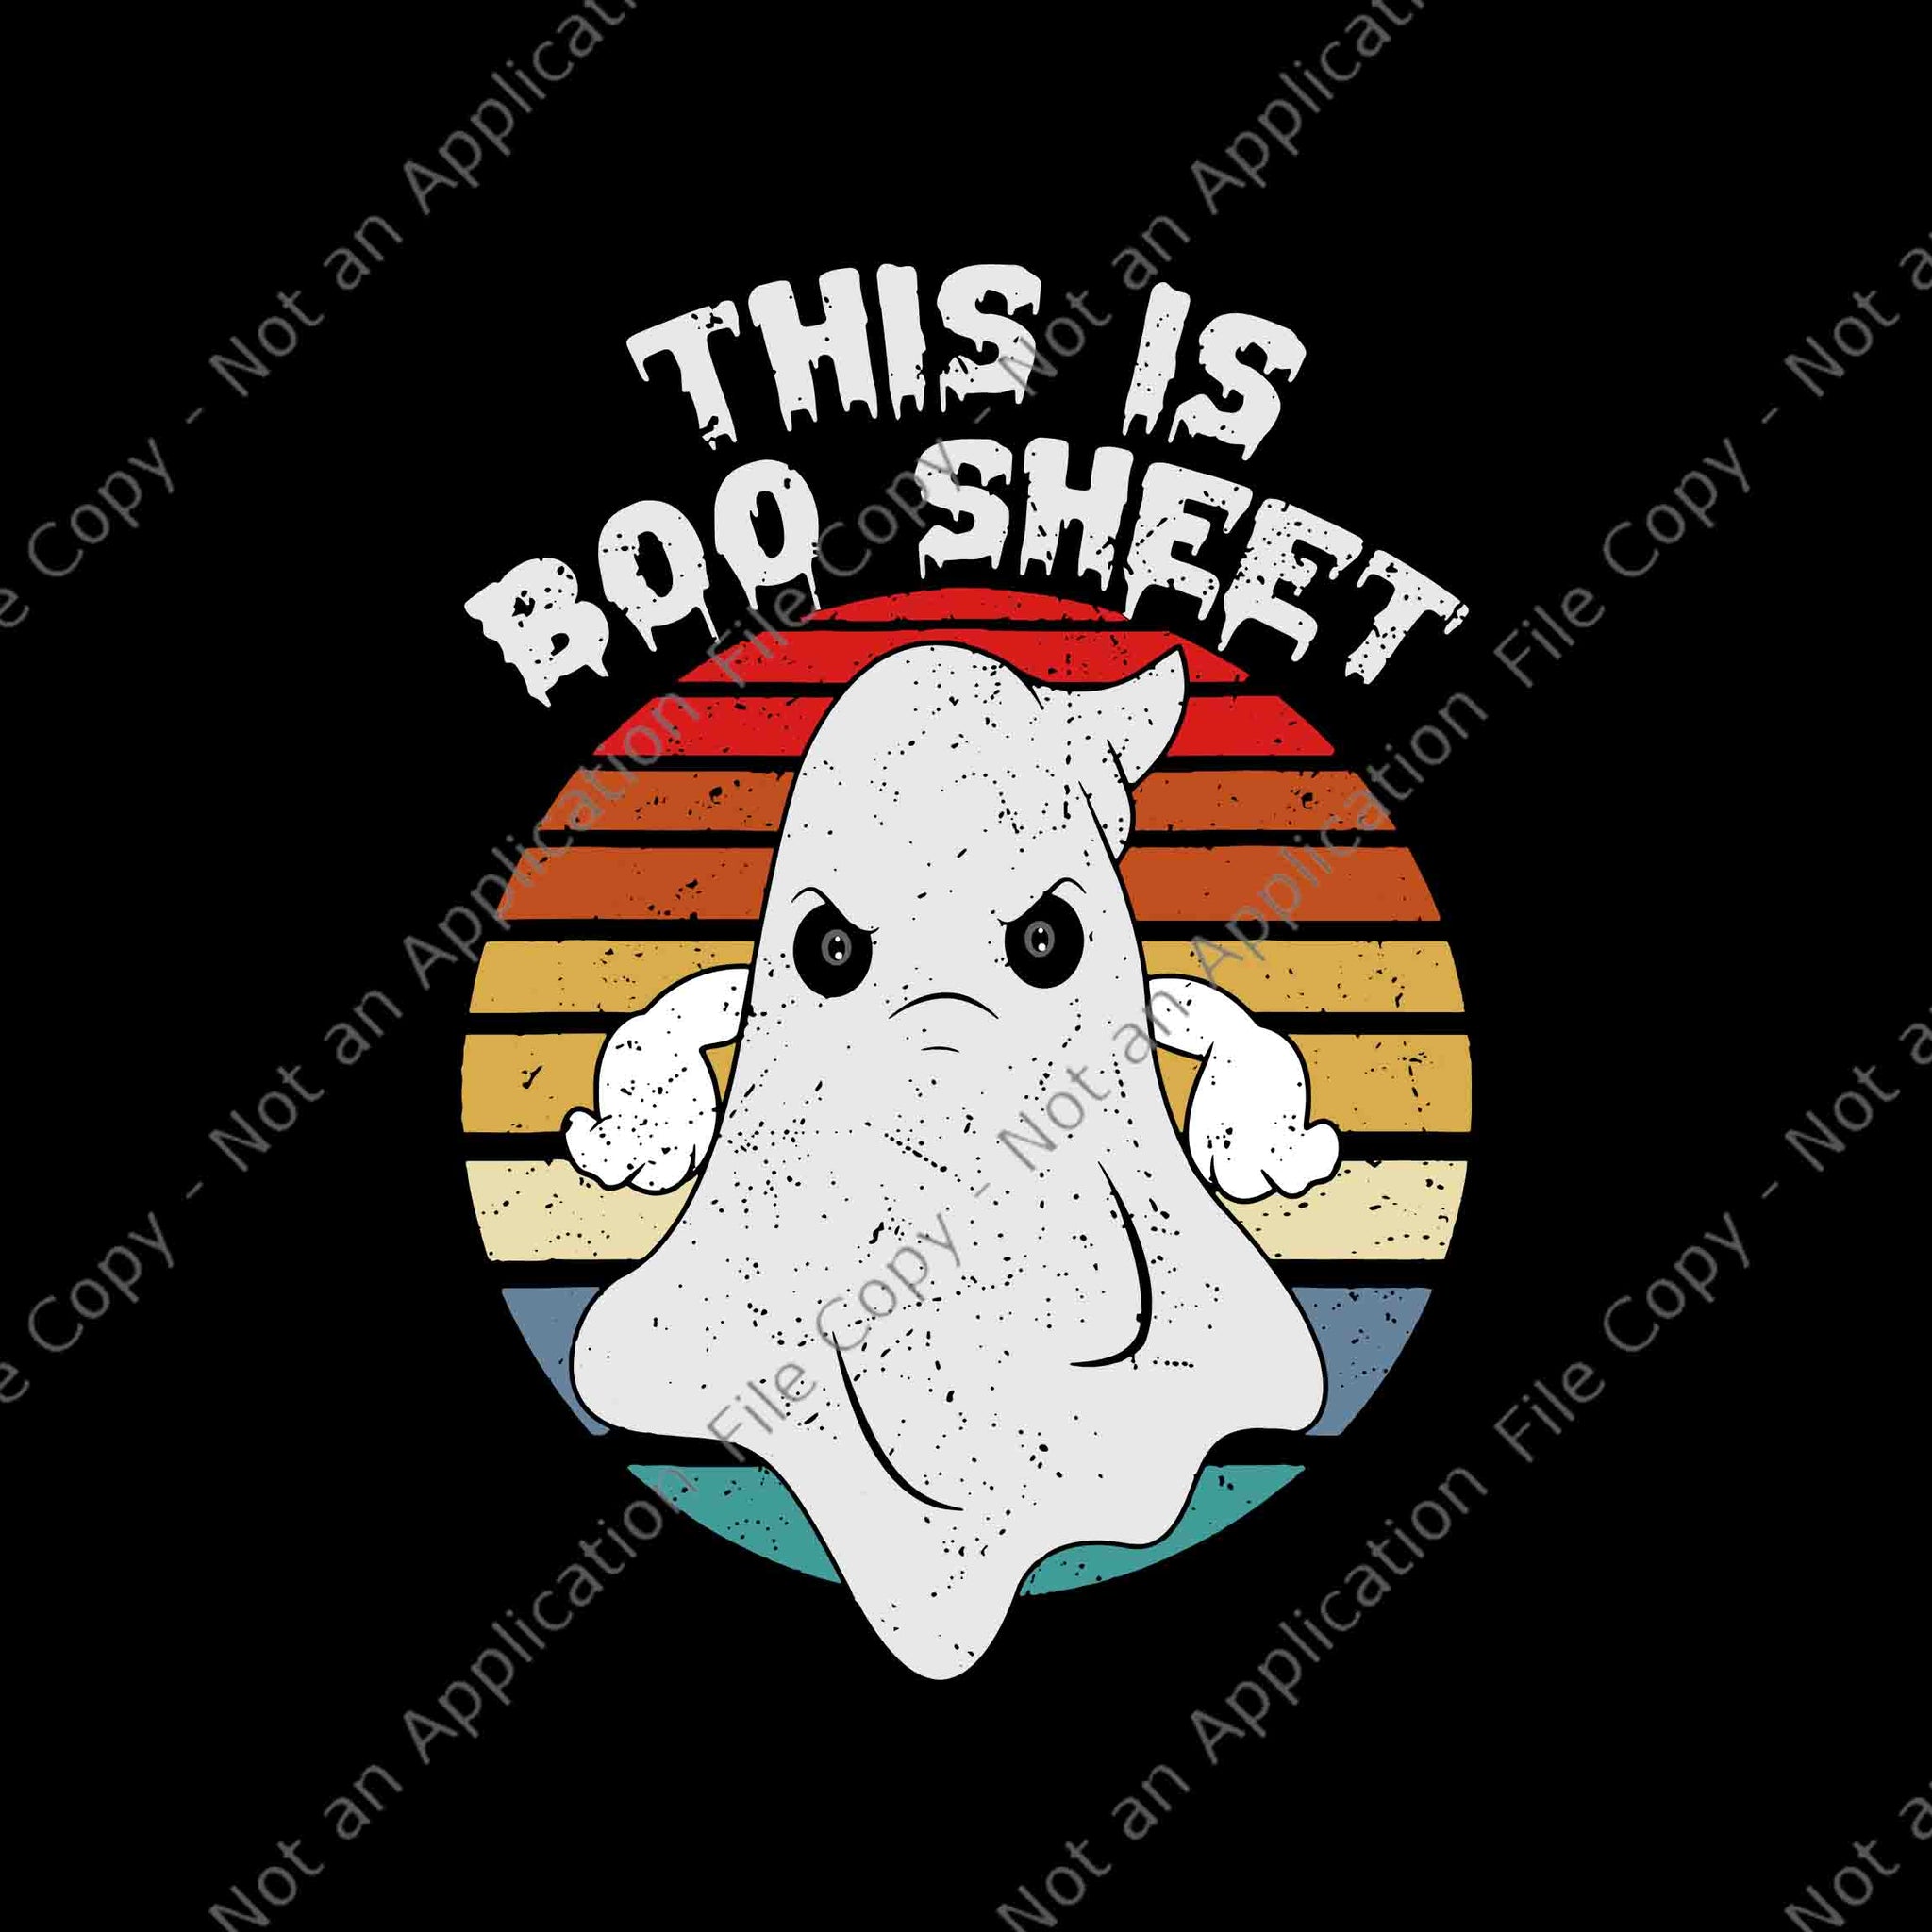 This Is Boo Sheet Ghost Retro Halloween Svg, Boo Sheet Svg, Halloween Svg, Ghost Halloween Svg, Ghost Svg